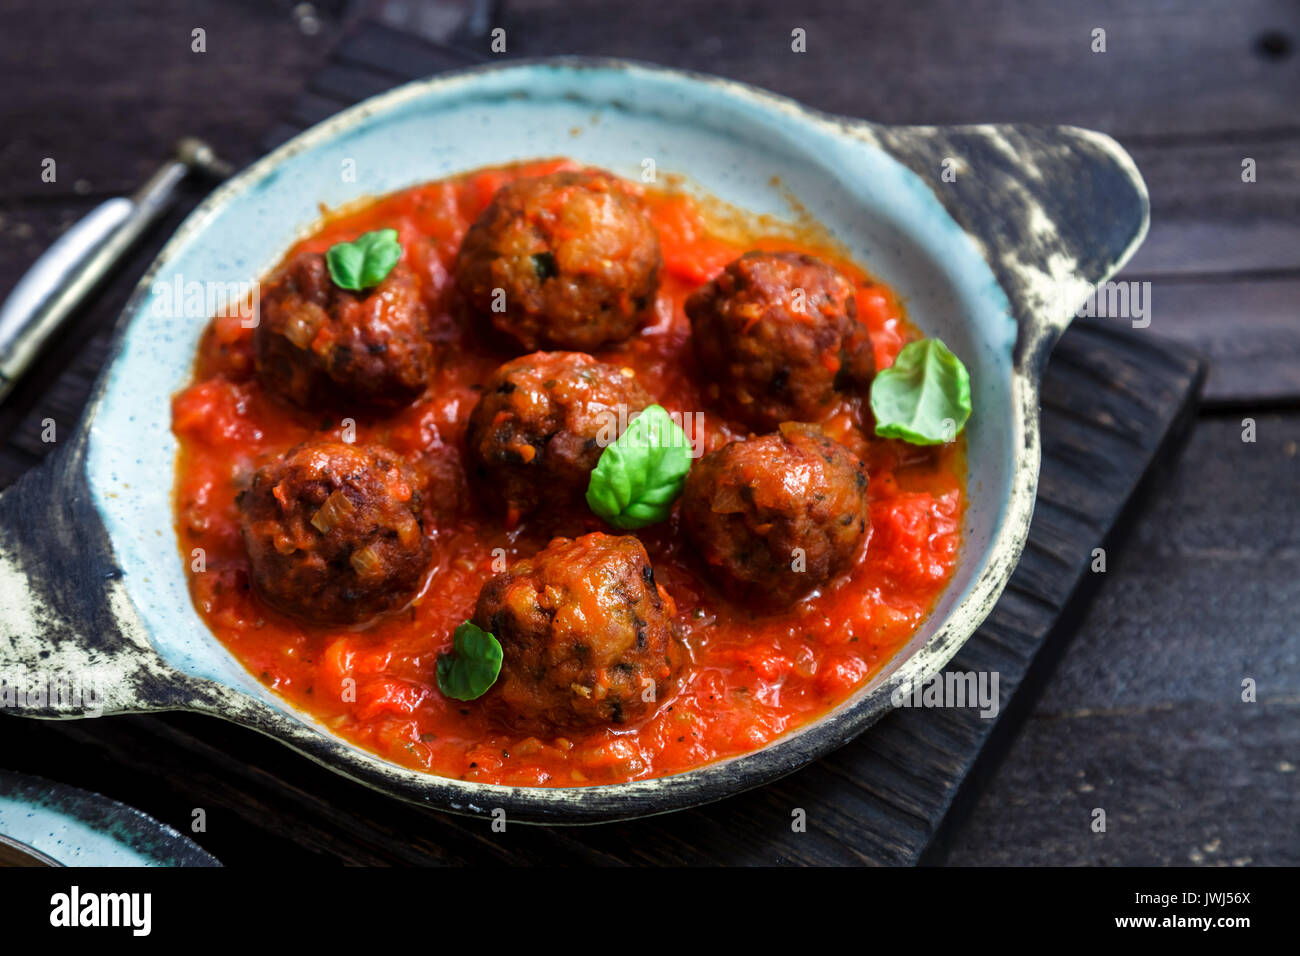 Meatballs with tomato sauce on a ceramic pan. Close view, rustic style Stock Photo